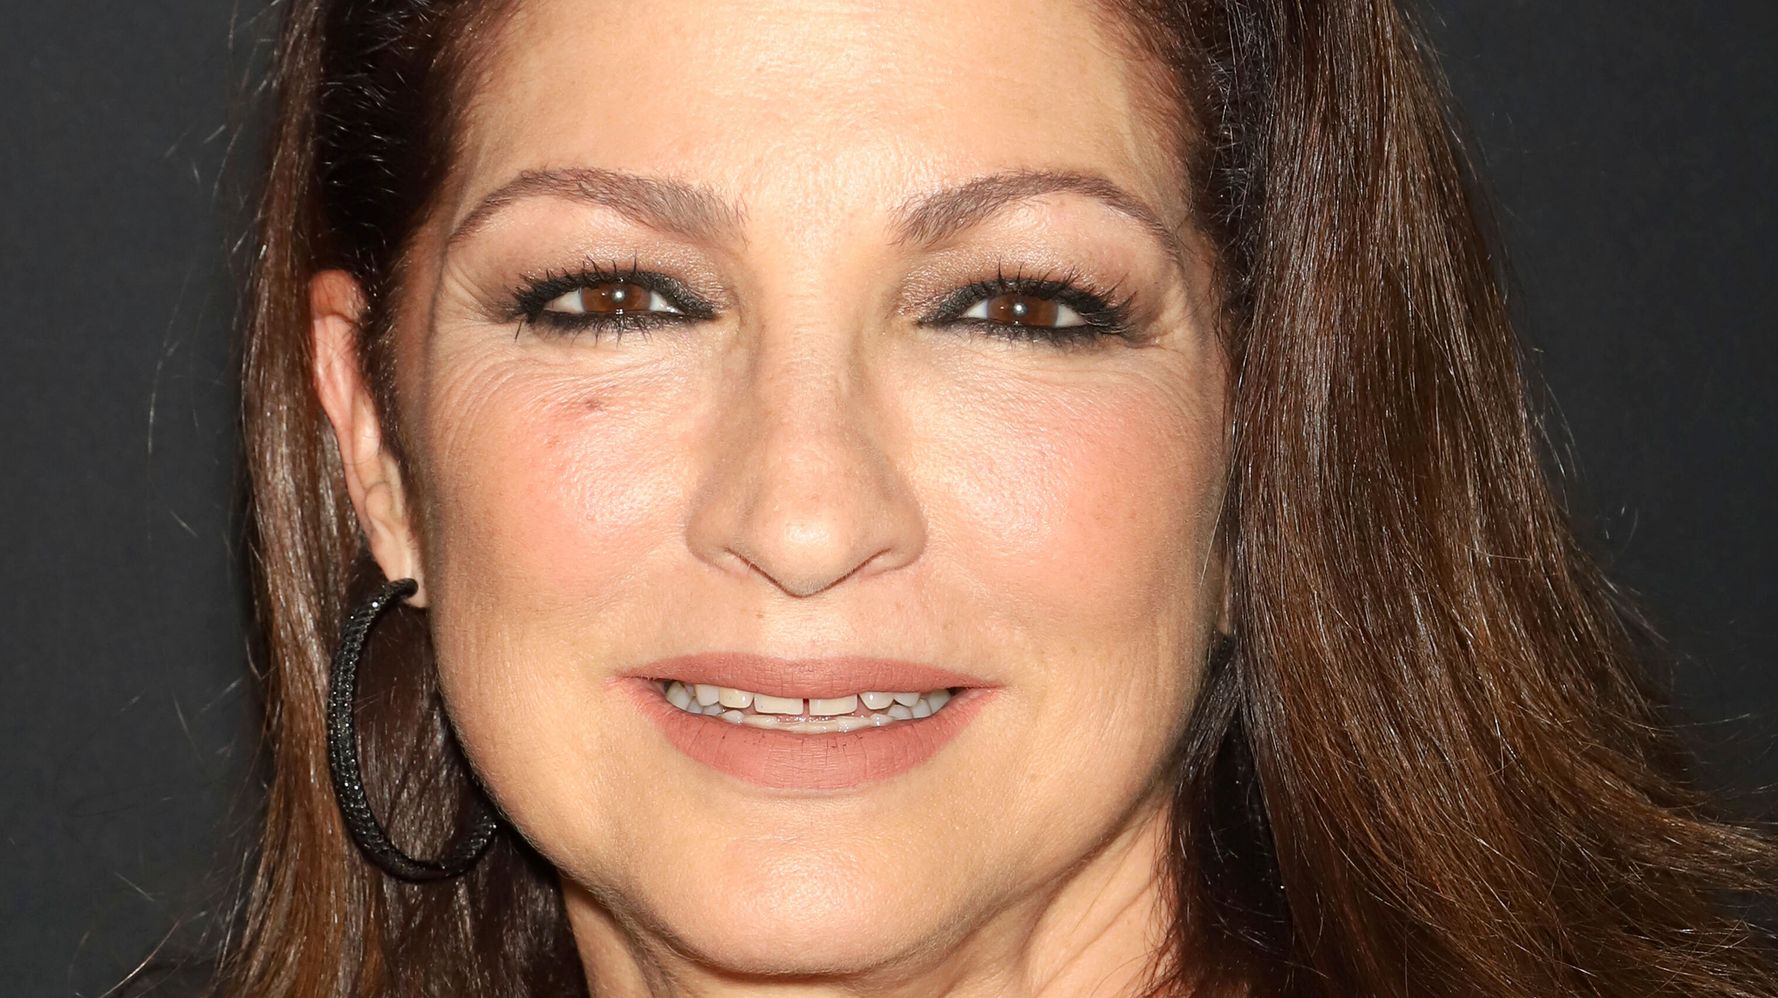 Gloria Estefan Reveals She Caught COVID-19, But Has Since Recovered